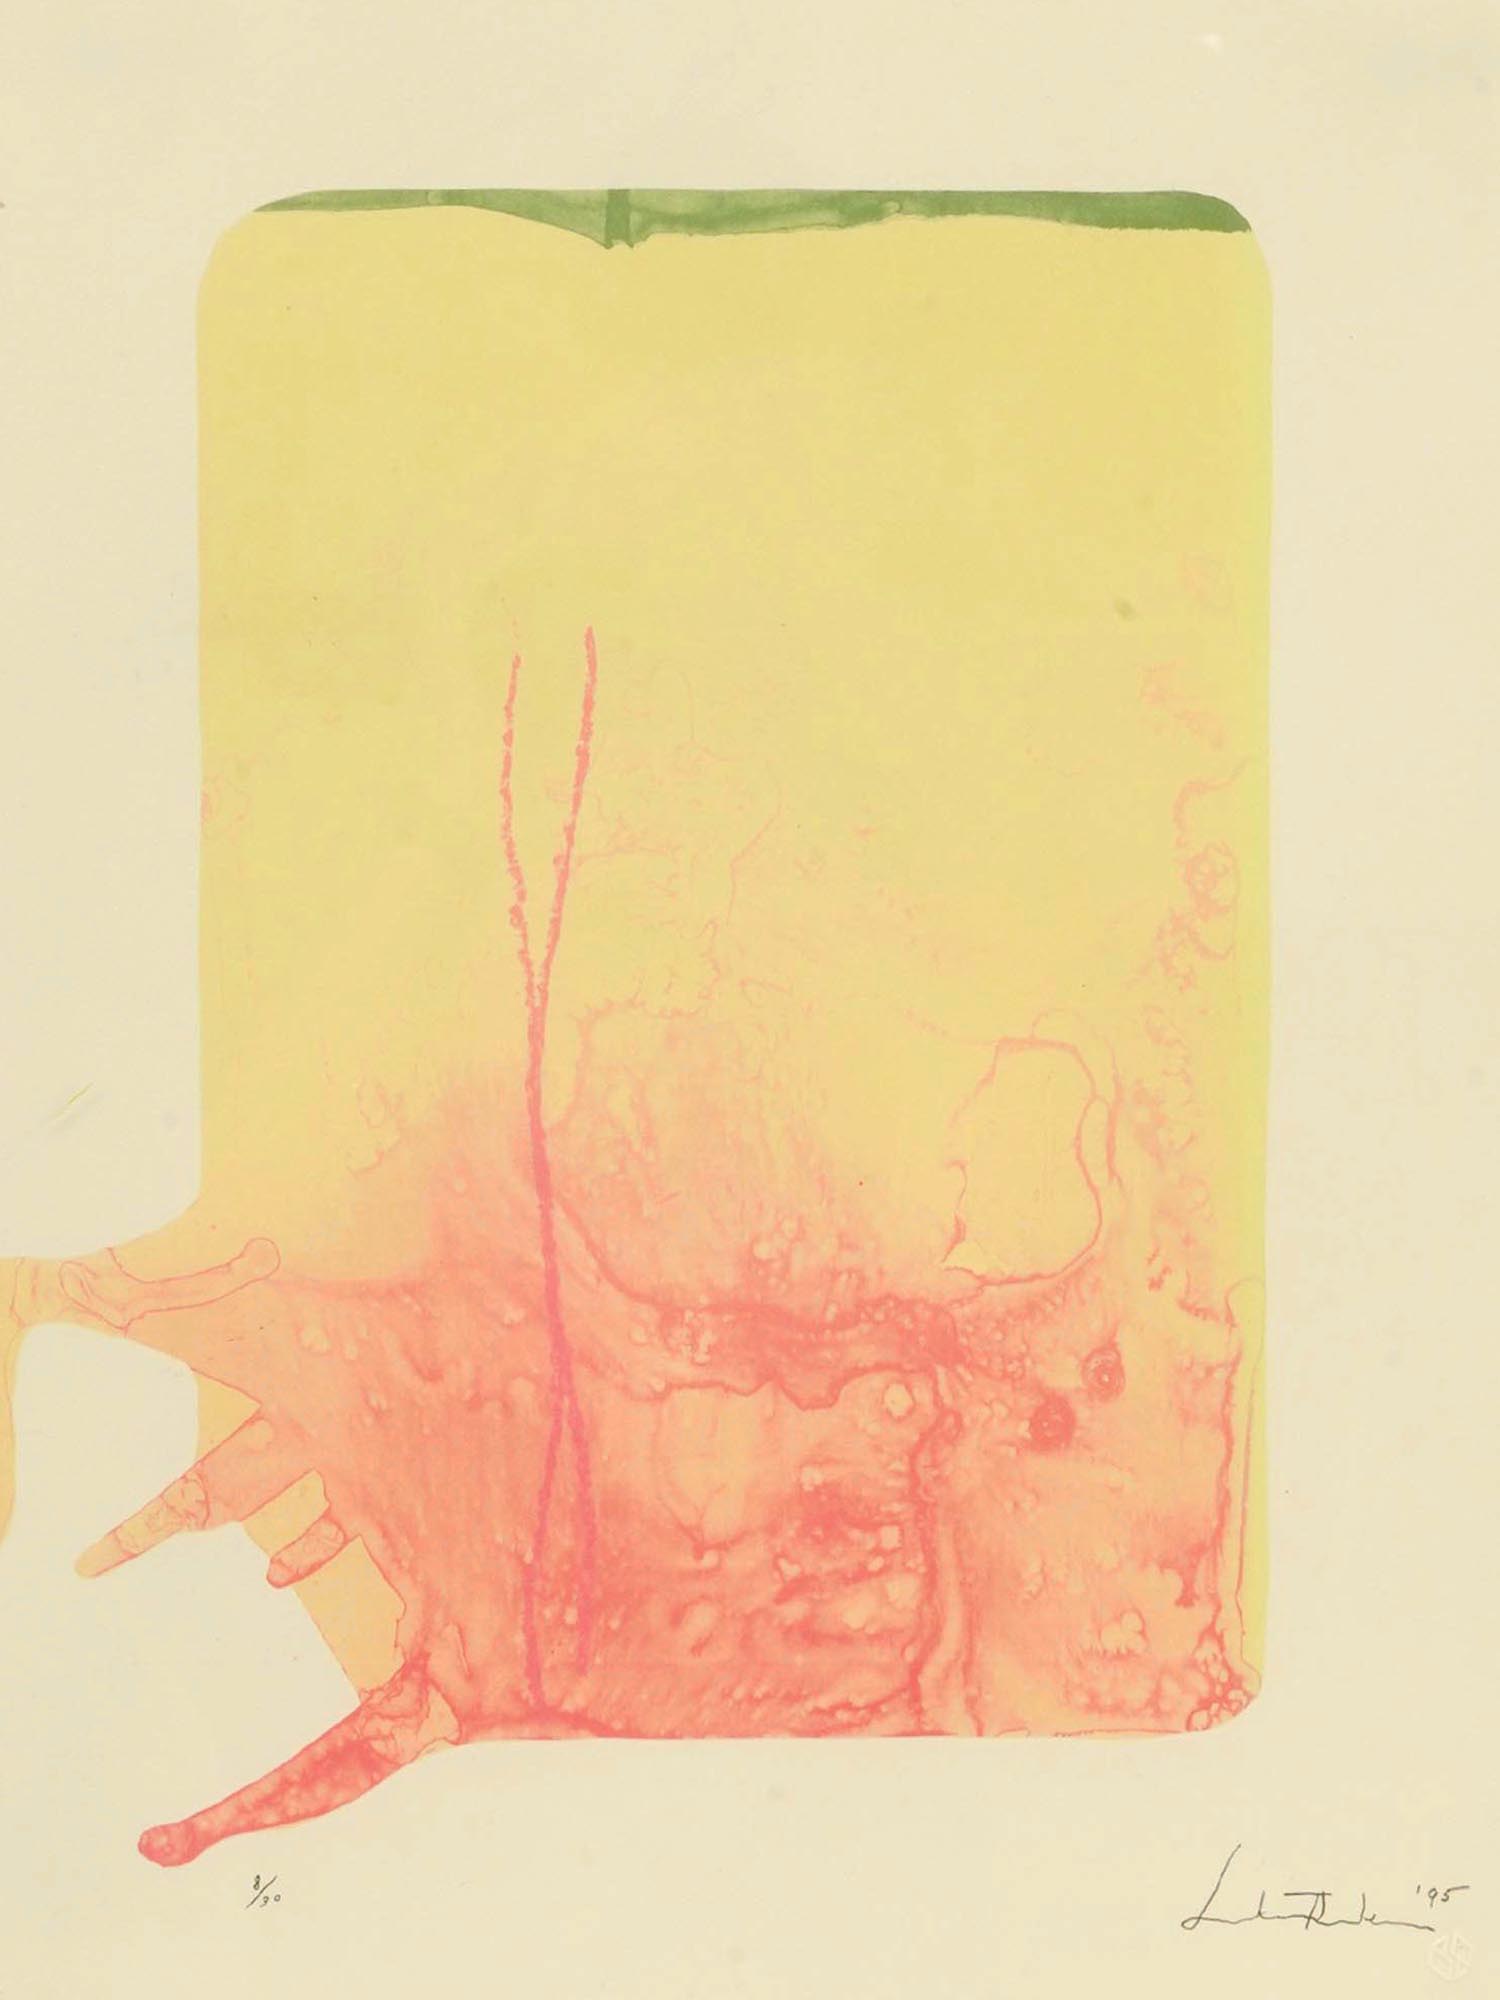 1995 AMERICAN LITHOGRAPH BY HELEN FRANKENTHALER PIC-1